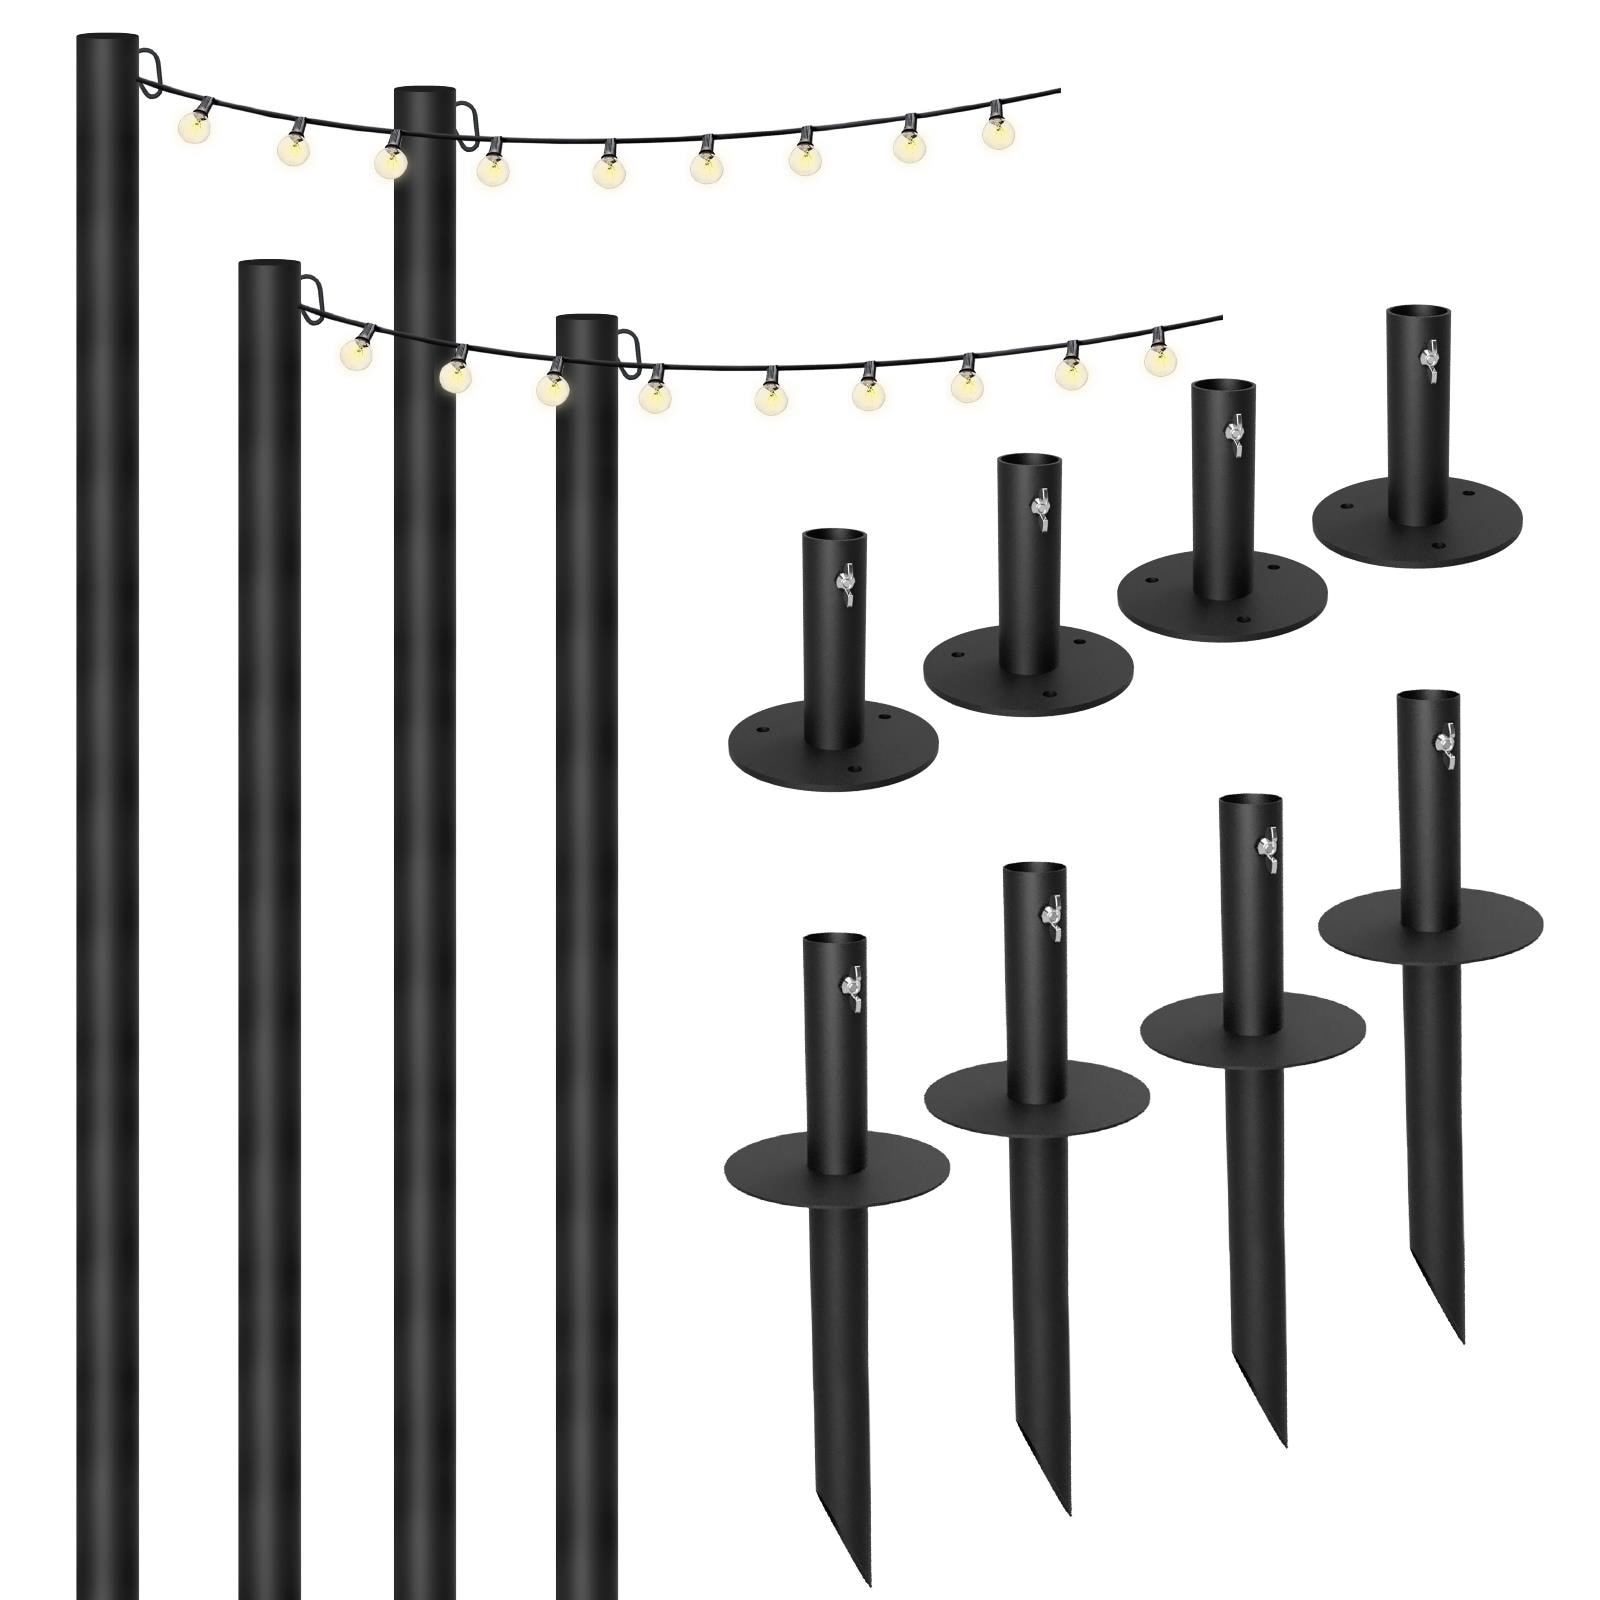 Allsop 9.5' Heavy-Duty String Light Pole Stand with Freestanding